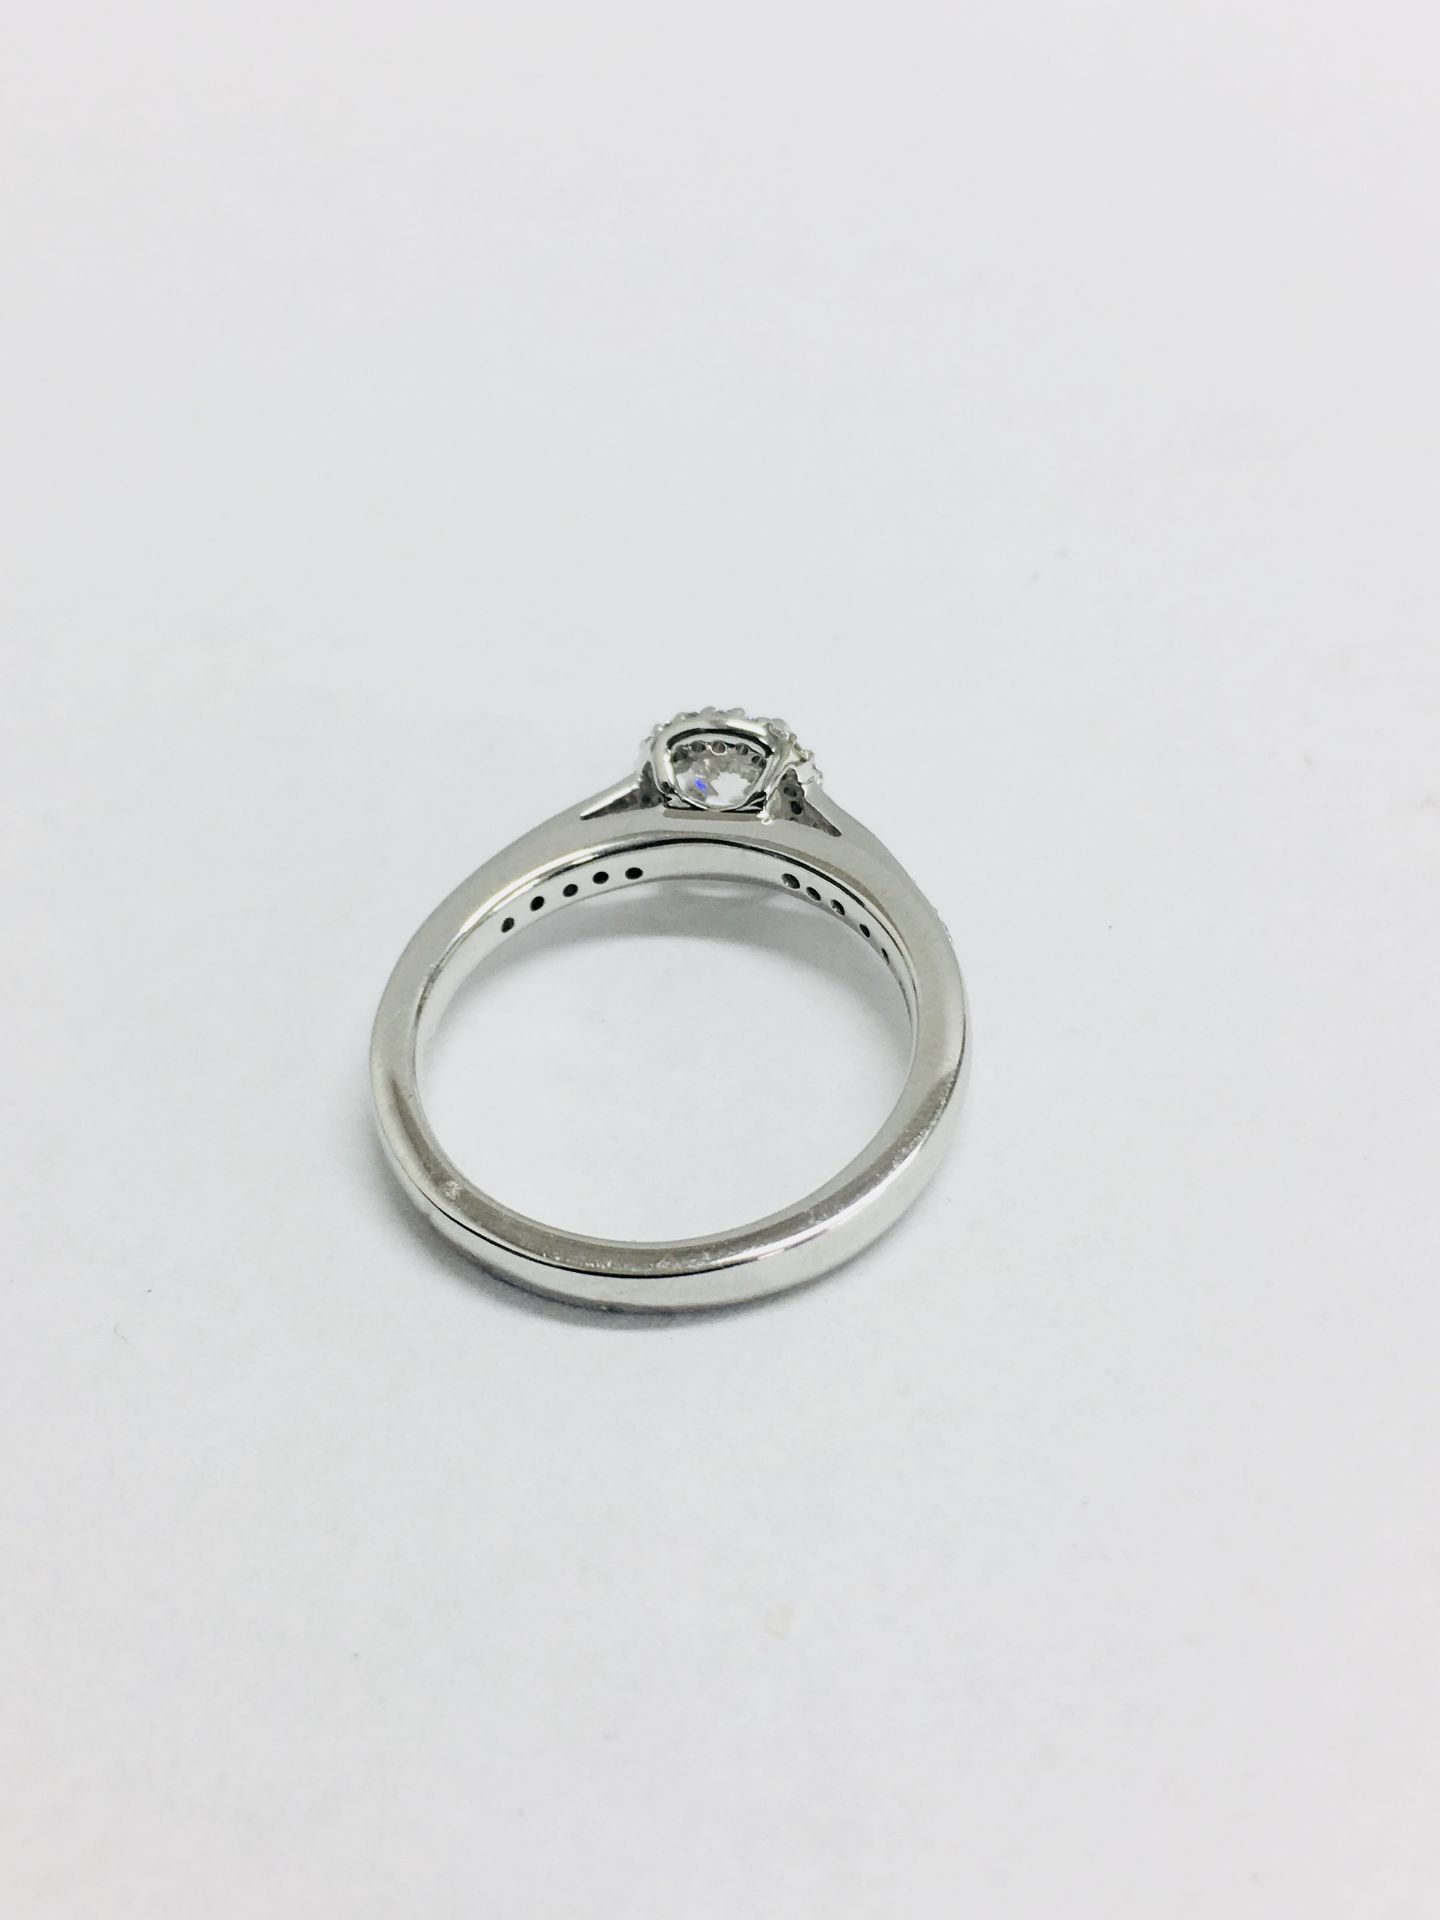 18ct white gold Halo style solitaire ring,0.30ct natural diamond,0.28ct h Colour si diamonds - Image 4 of 6